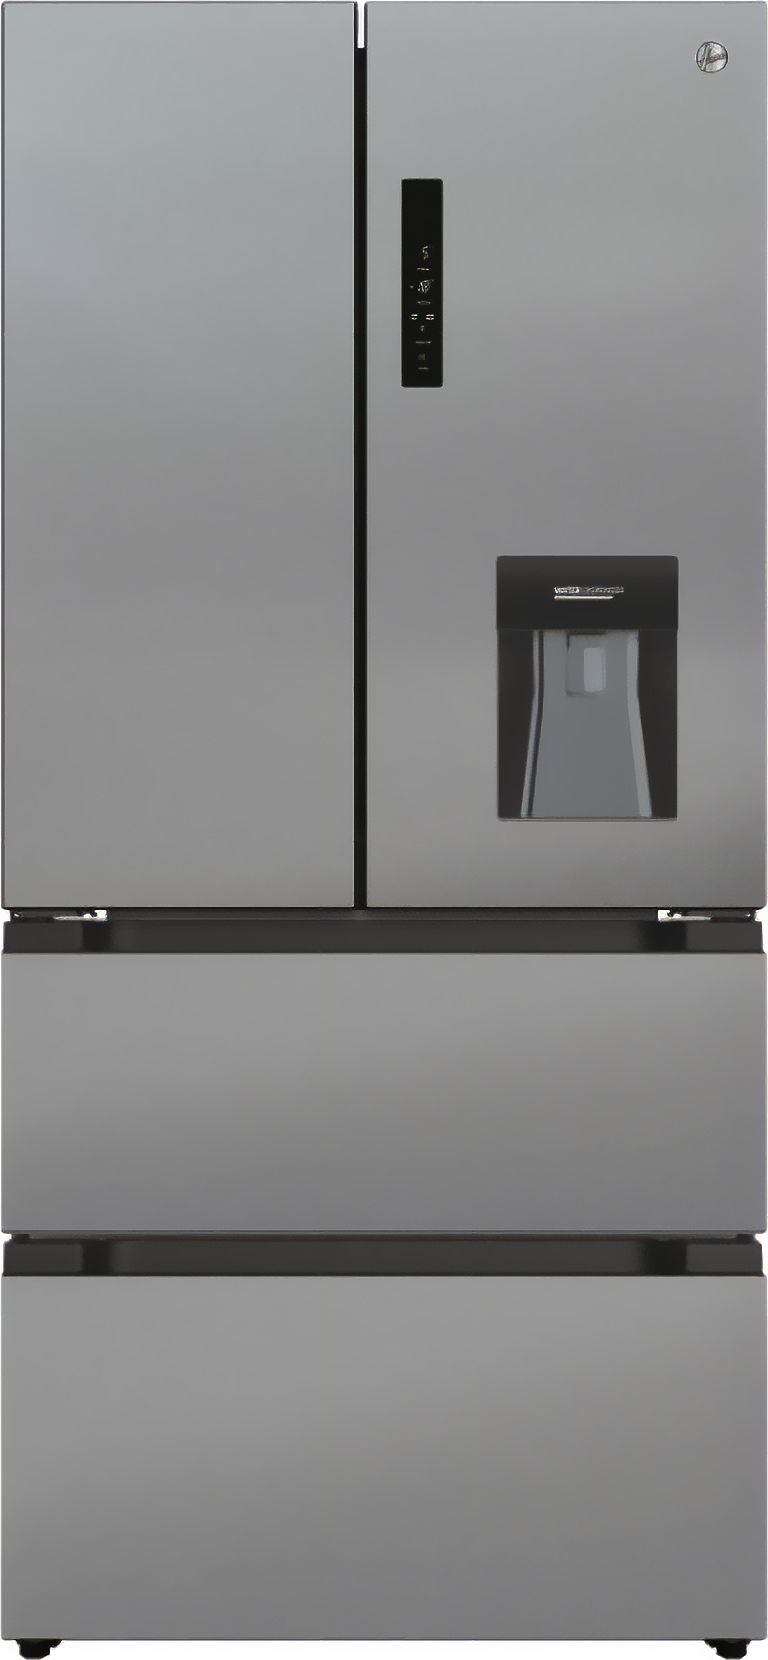 Hoover H-FRIDGE 700 MAXI HSF818EXWDK Non-Plumbed Total No Frost American Fridge Freezer - Inox - E Rated, Stainless Steel